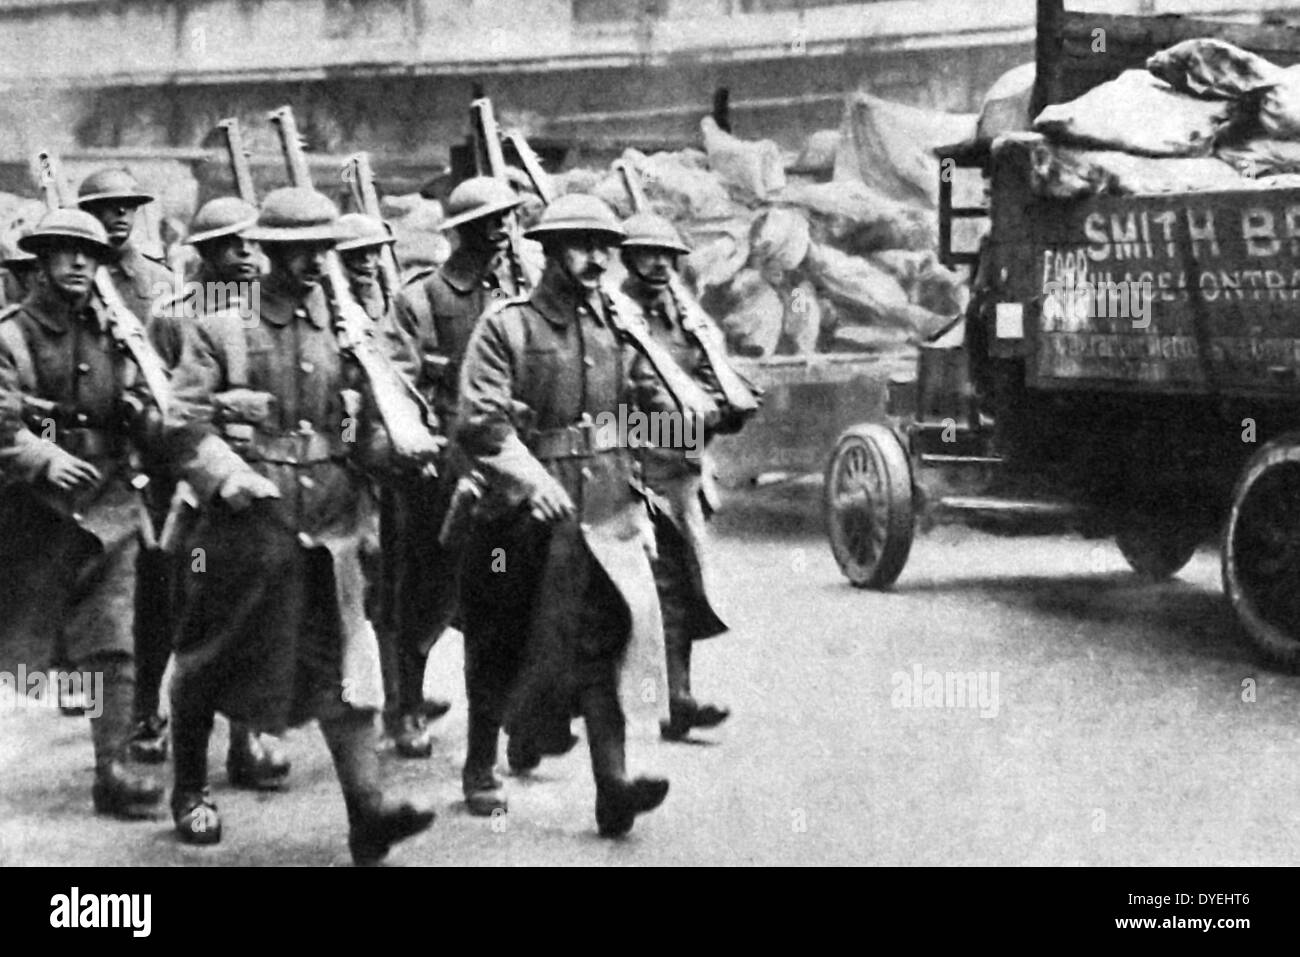 Soldiers are deployed during the The UK General Strike lasted nine days (May 3 to 12, 1926). The strike resulted in defeat for the unions. A long confrontation in the coal industry, with strikes and lockouts, had made no progress. To support the 800,000 striking miners the unions called out 1,750,000 workers. The government was well prepared and used middle class volunteers to provide basic services. Stock Photo